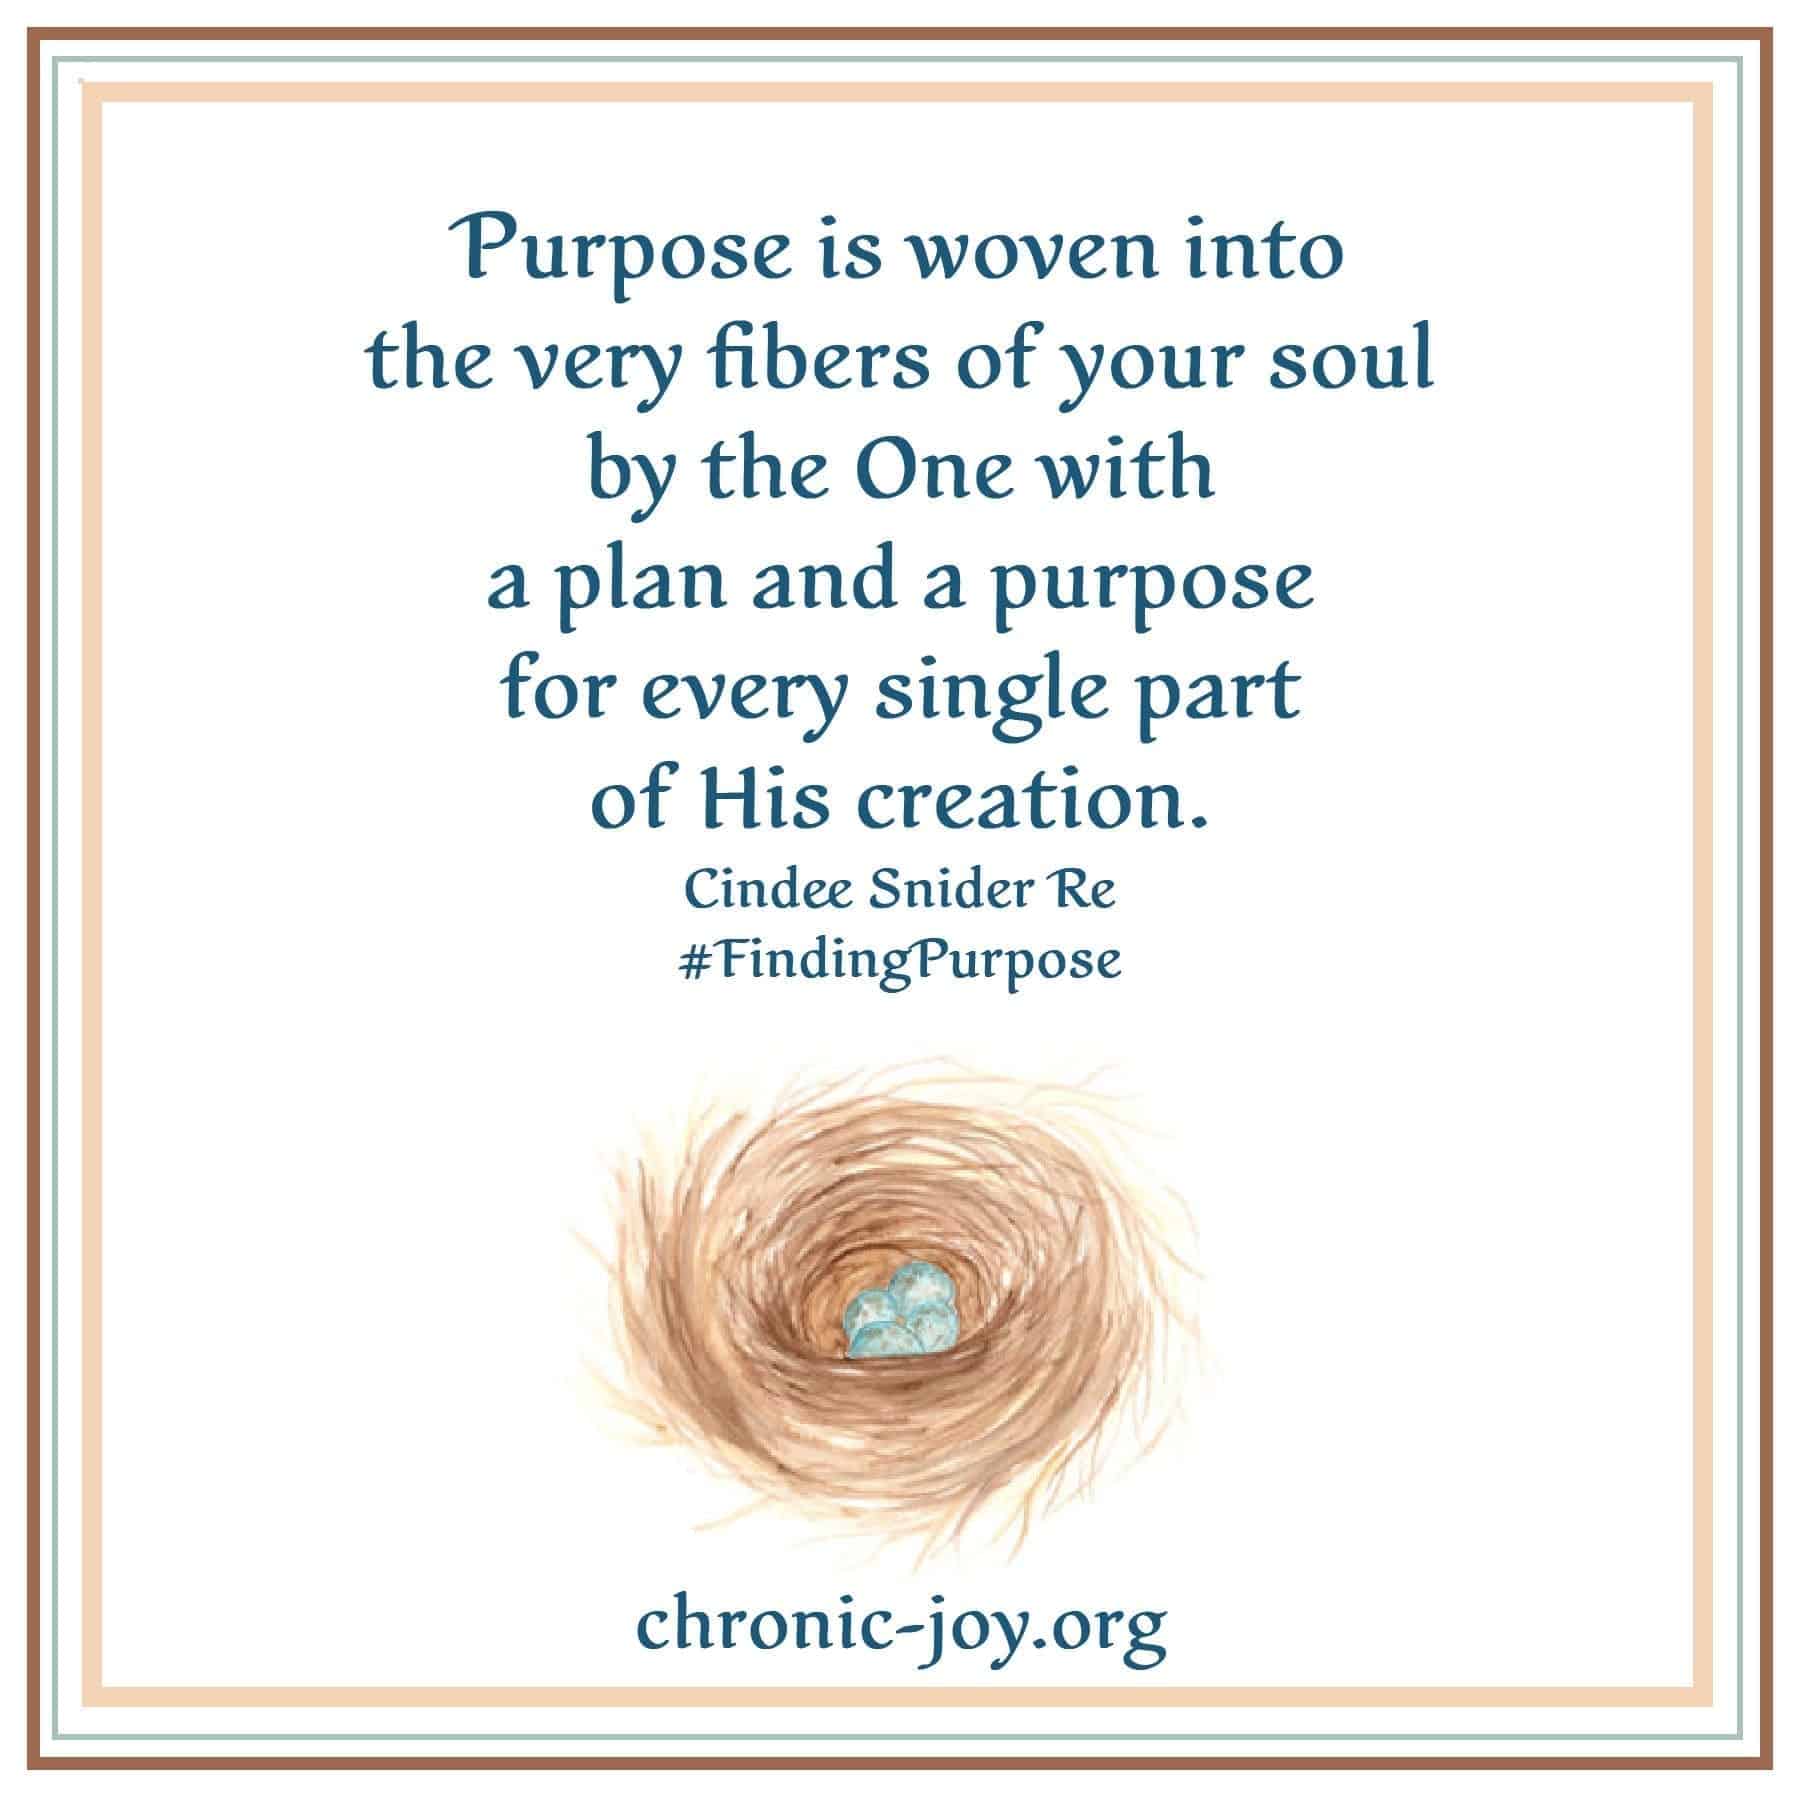 Purpose is woven into the very fibers of your soul...